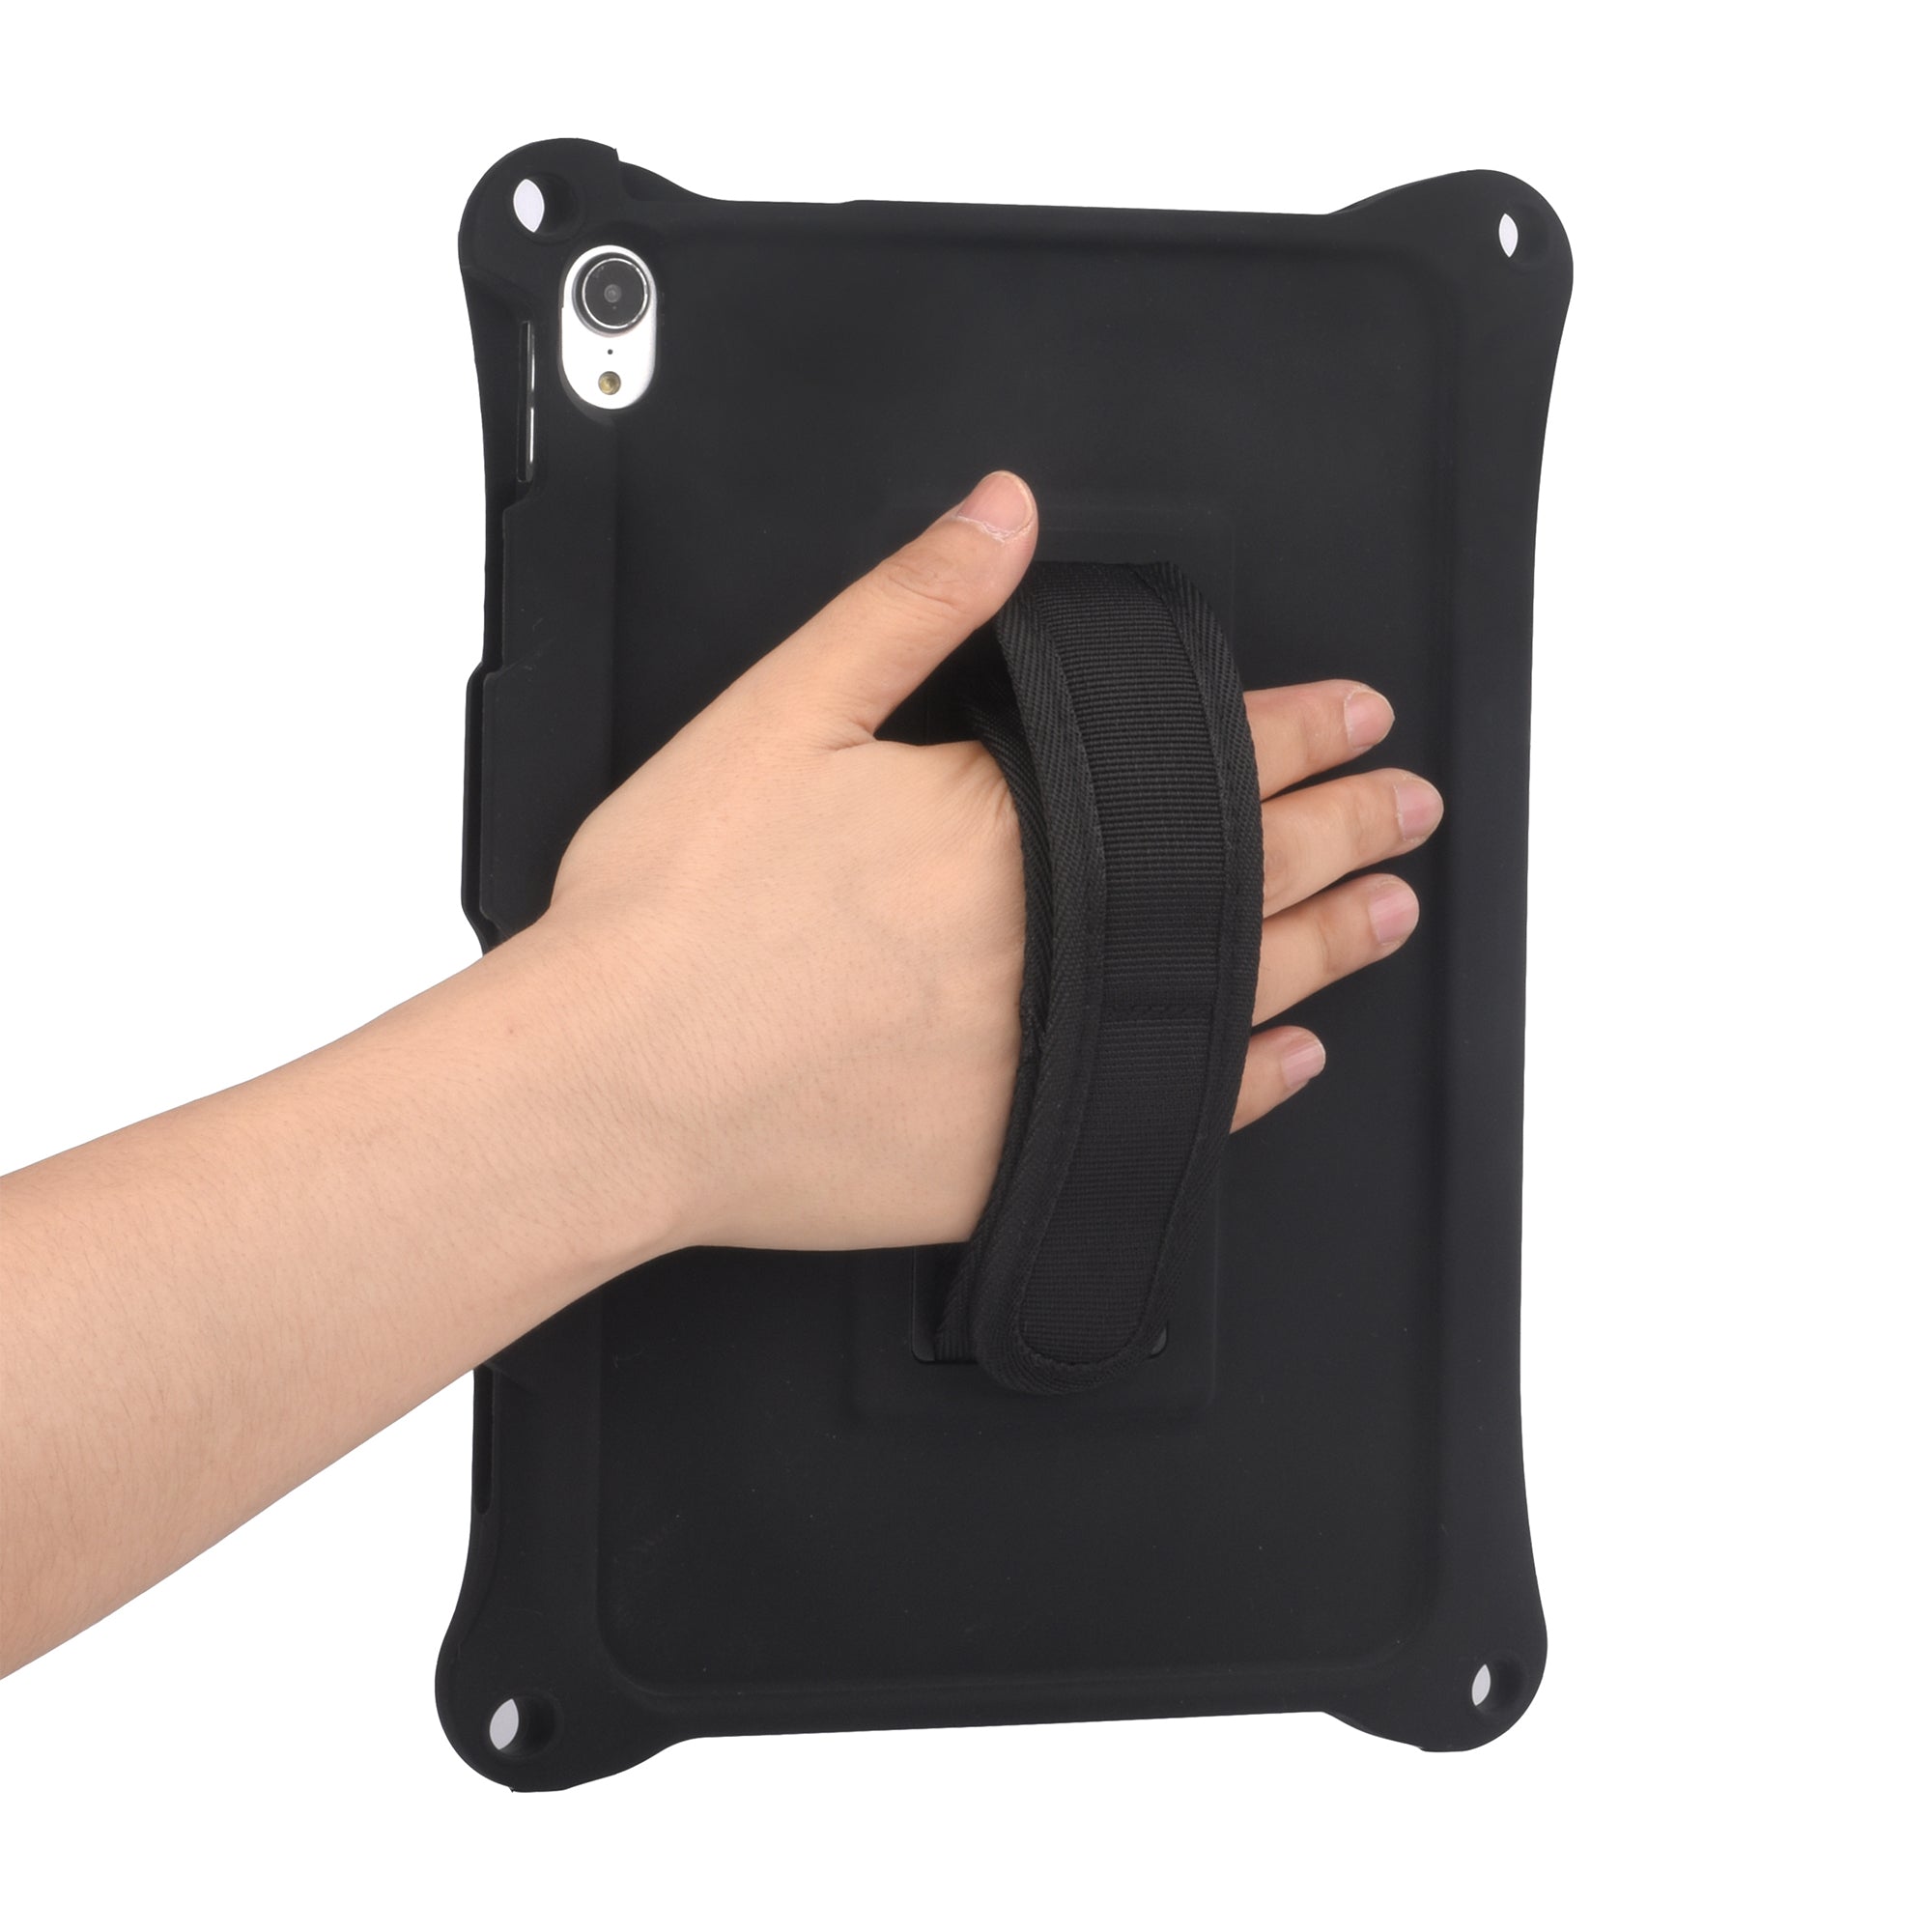 Cooper Bounce Strap Rugged case with Strap & Kickstand for iPad